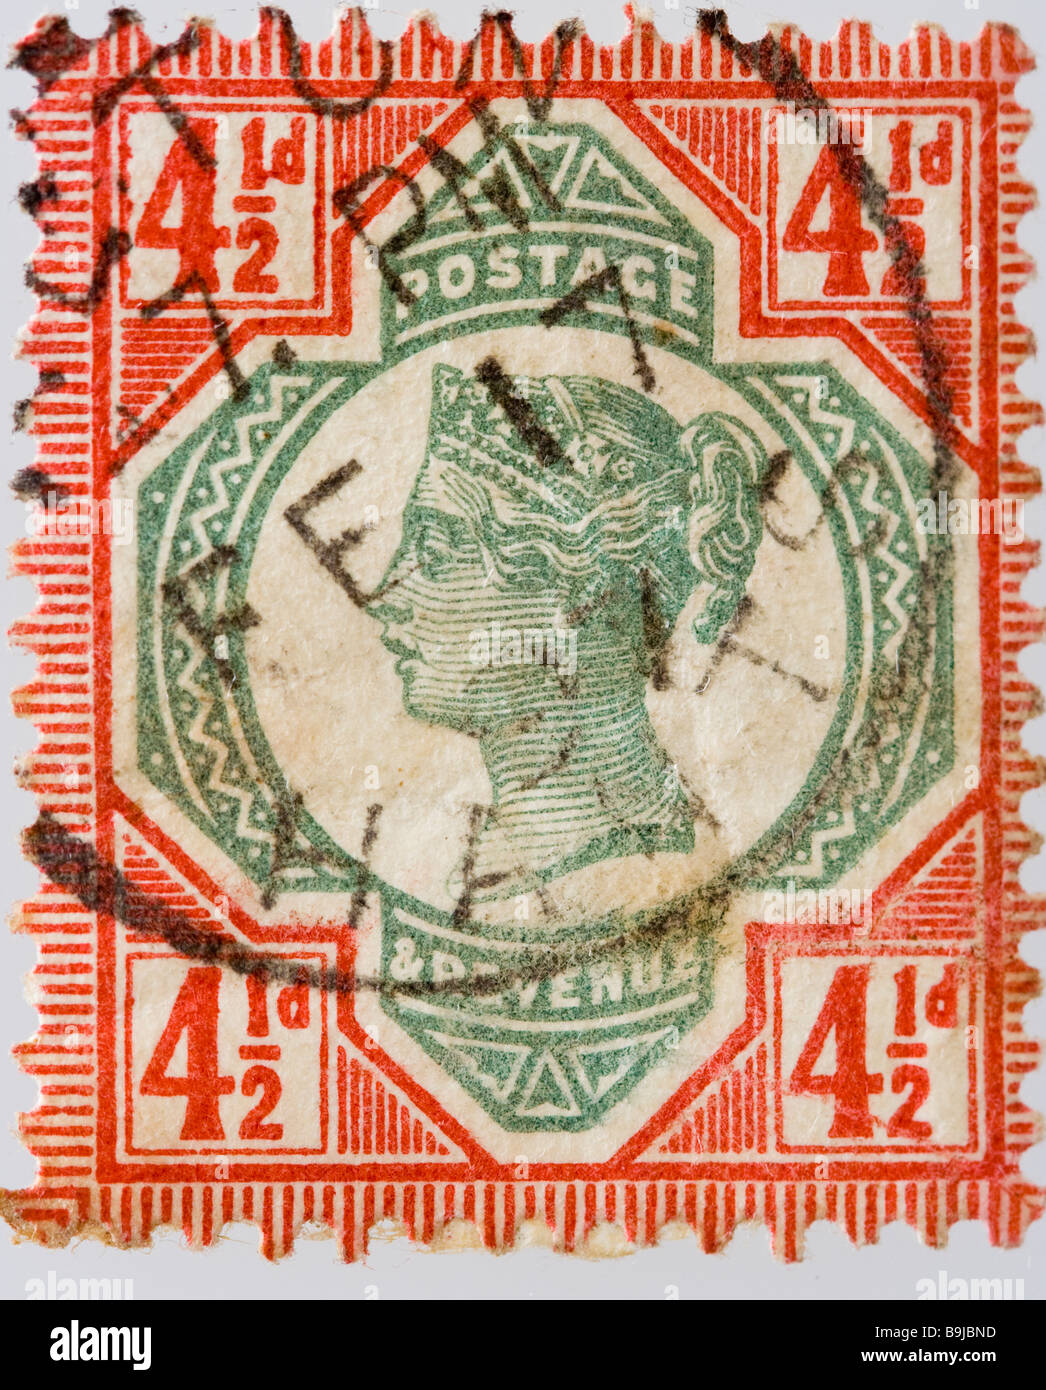 British Victorian four and half pence, 4½d postage stamp. SG 206, bright red and green, franked, used. Part of the Jubilee issue 1887-1900. Stock Photo